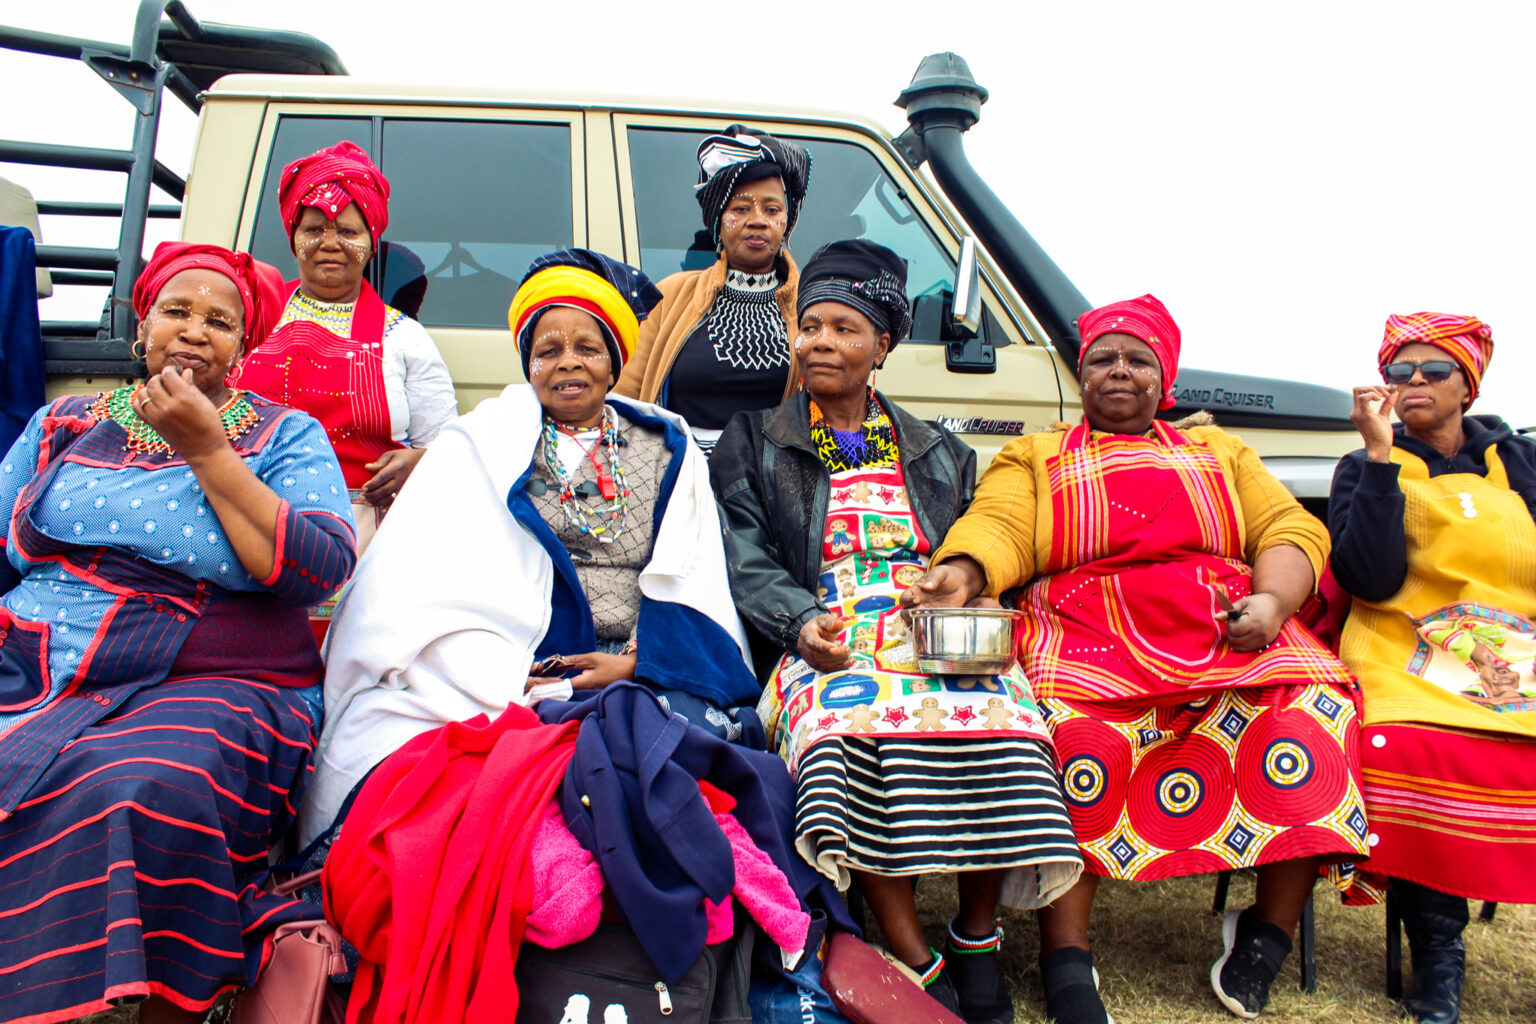 The women of Makhanda who were assisting with catering on Saturday 22 April during the commemoration event of the Battle of Grahamstown. Photo: Buhle Andisiwe Made